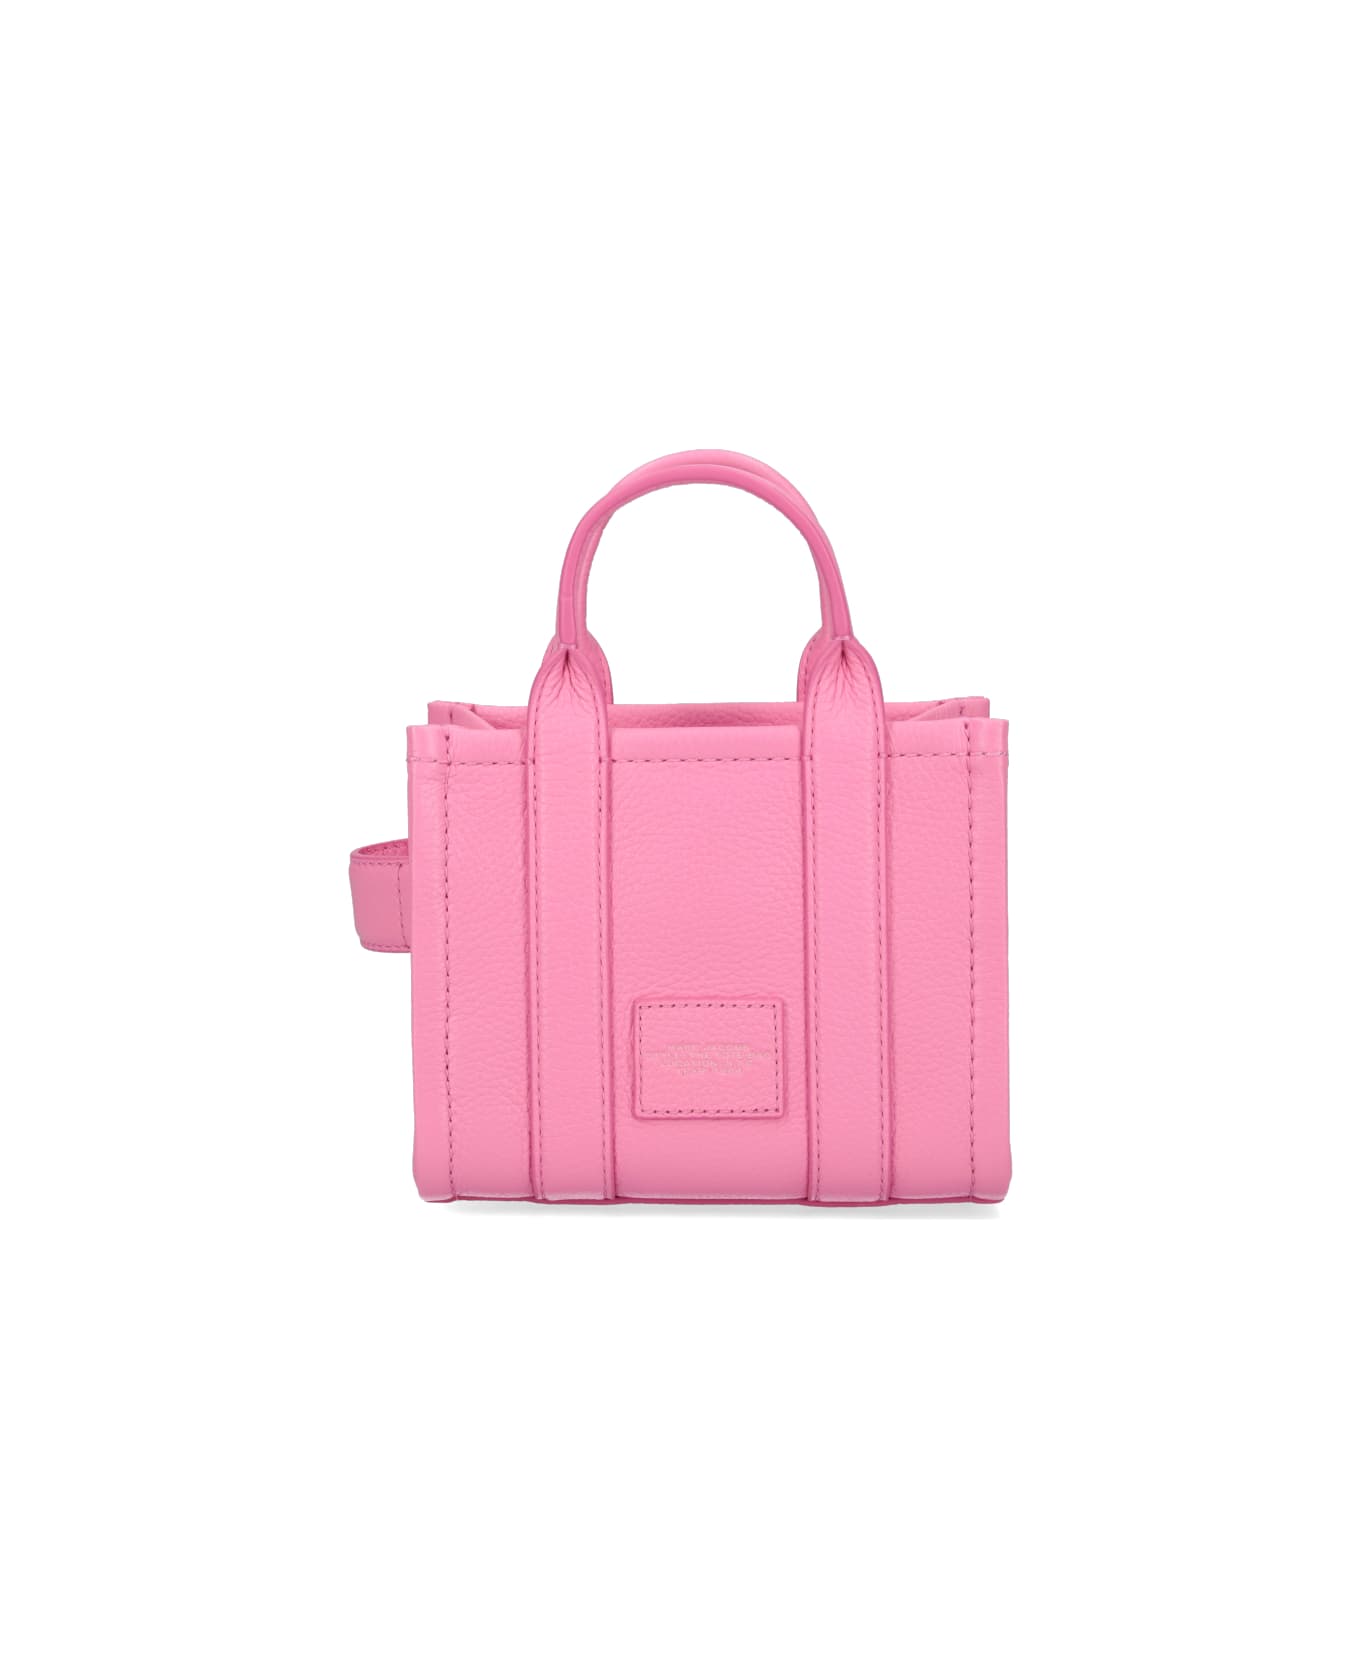 Marc Jacobs Crossbody Tote Bag - Pink